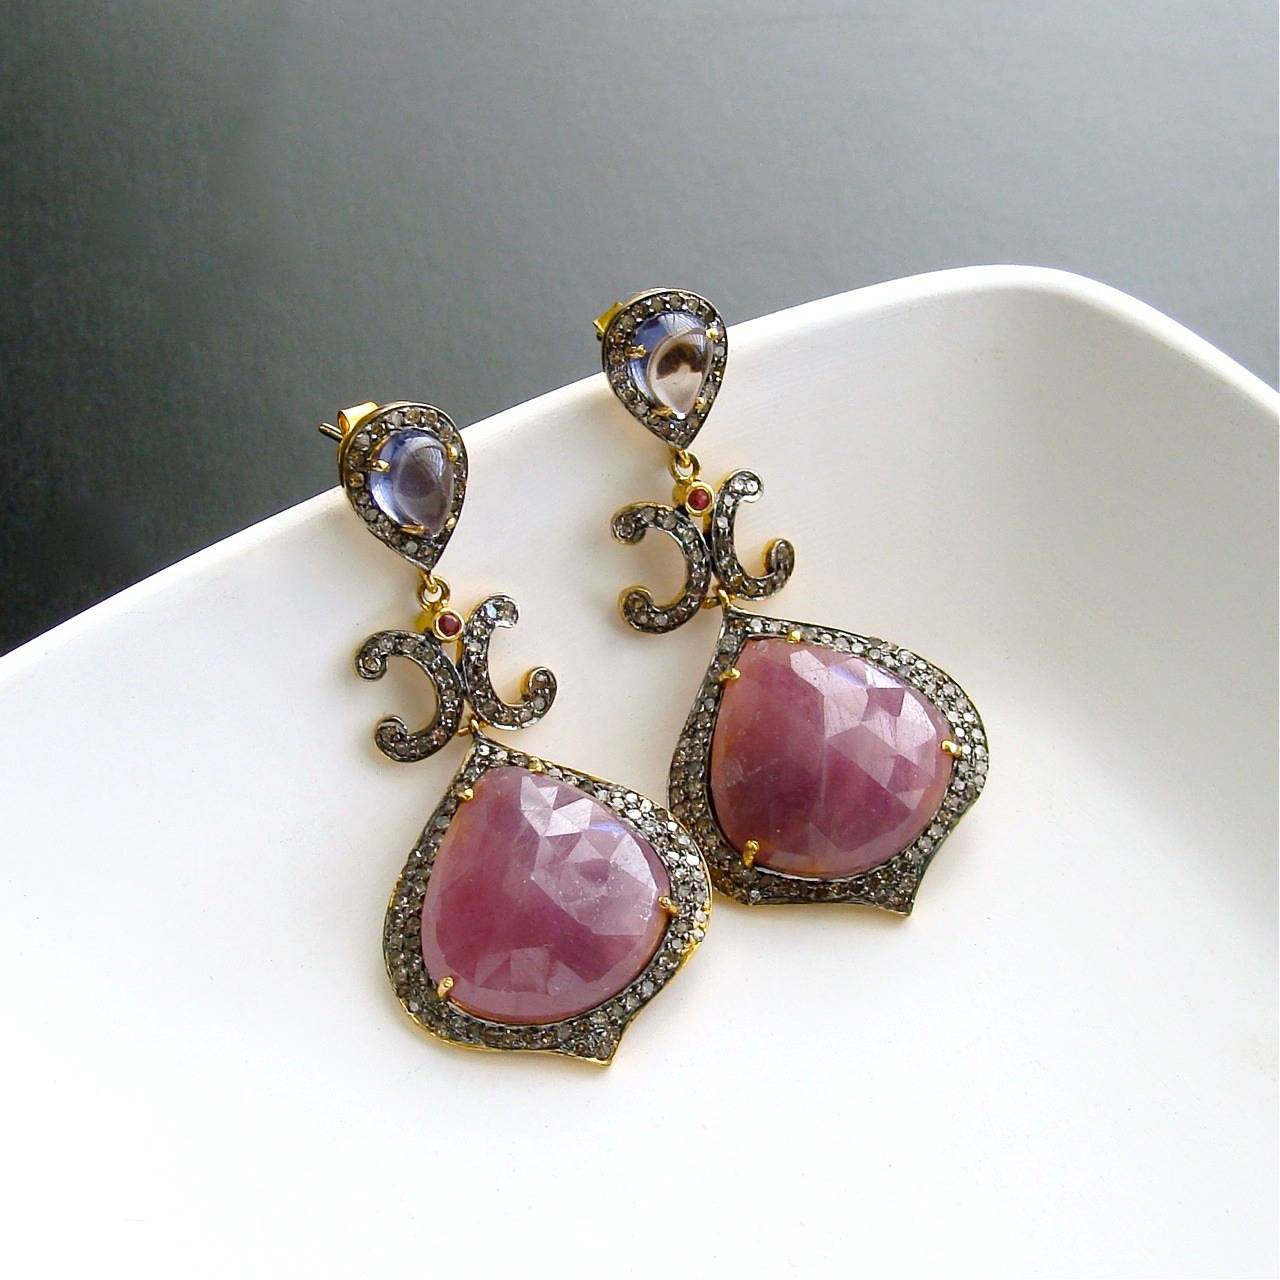 Raspberry Pink Violet Sapphire Diamond Earrings - Candace Earrings.

Ravishing raspberry pink faceted teardrop sapphires, surrounded by a Moorish shaped pave setting of sparkling diamonds in mixed metals, is the focal point of these gorgeous